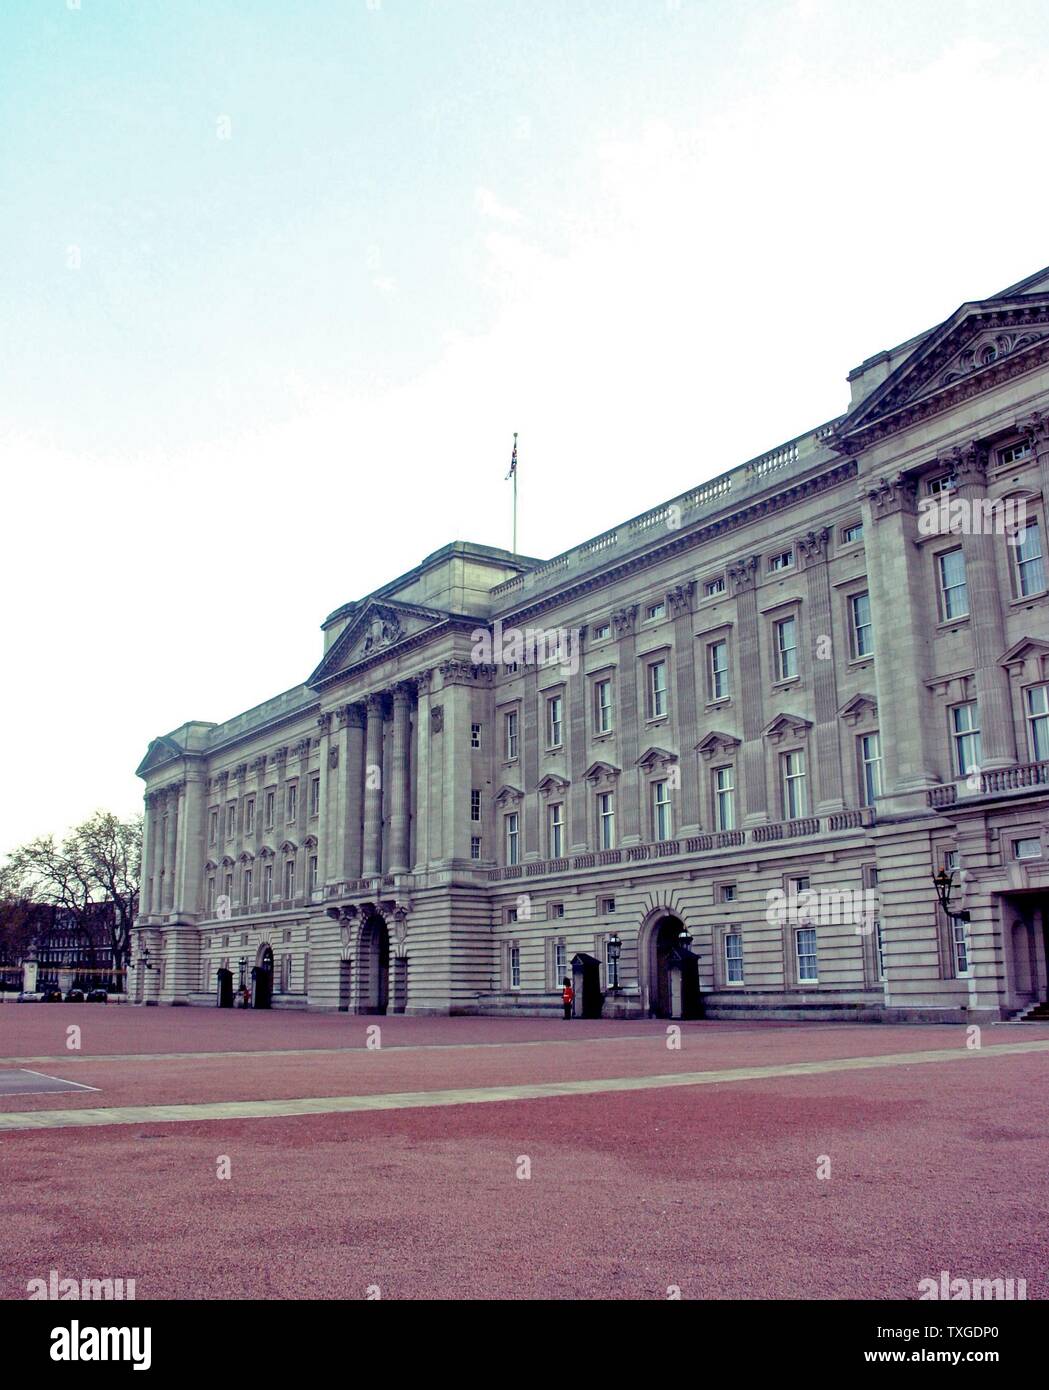 Exterior of Buckingham Palace, residence and principal workplace of the monarchy of the United Kingdom. Dated 2014 Stock Photo